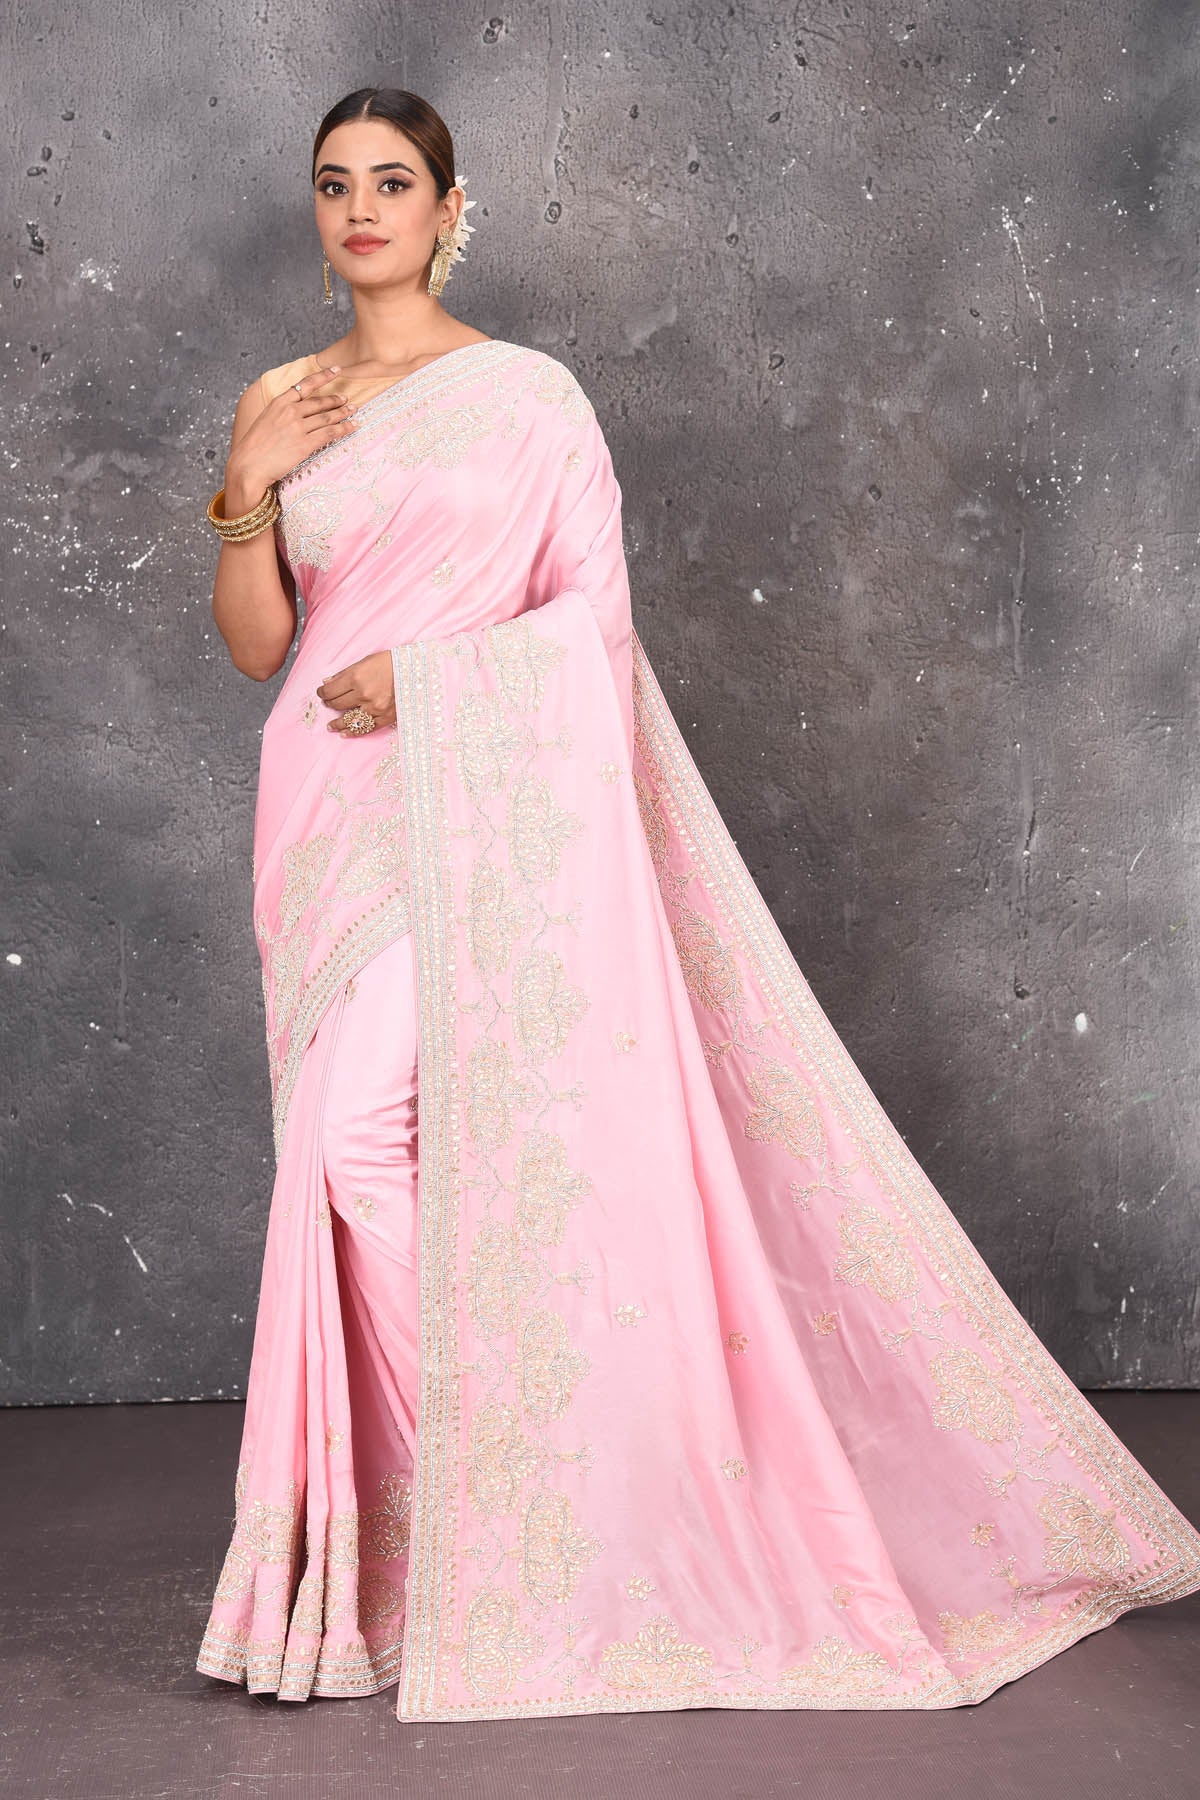 Shop this elegant baby pink gota patti mirror embroidered soft organza silk designer saree online in USA with colourful threadwork of flowers, gota patti leaves and dazzling cut dana and mirror work details. Mirror bootis are scattered all over the saree to match the brightness of the happy pink look. Add this designer sari to your collection from Pure Elegance Indian fashion store in USA.-Full view with open pallu.